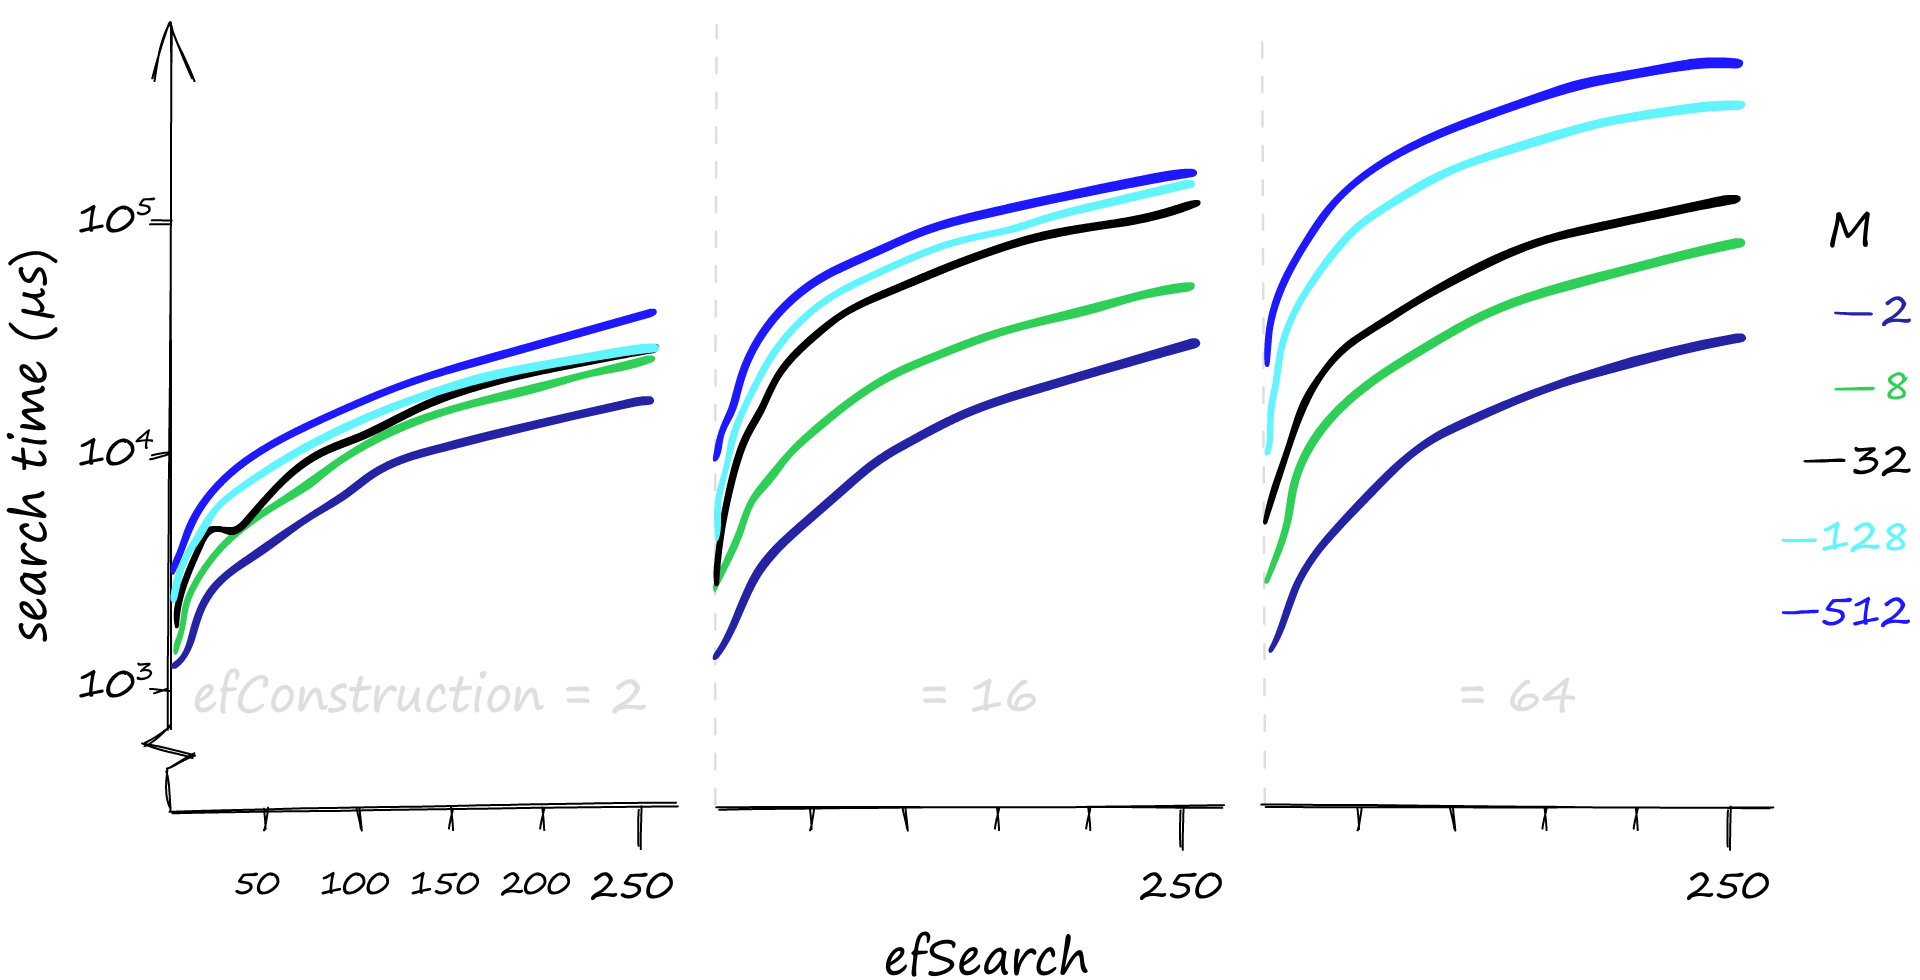 Search time in µs for various M, efConstruction, and efSearch parameters when searching for 1000 queries. Note that the y-axis is using a log scale.